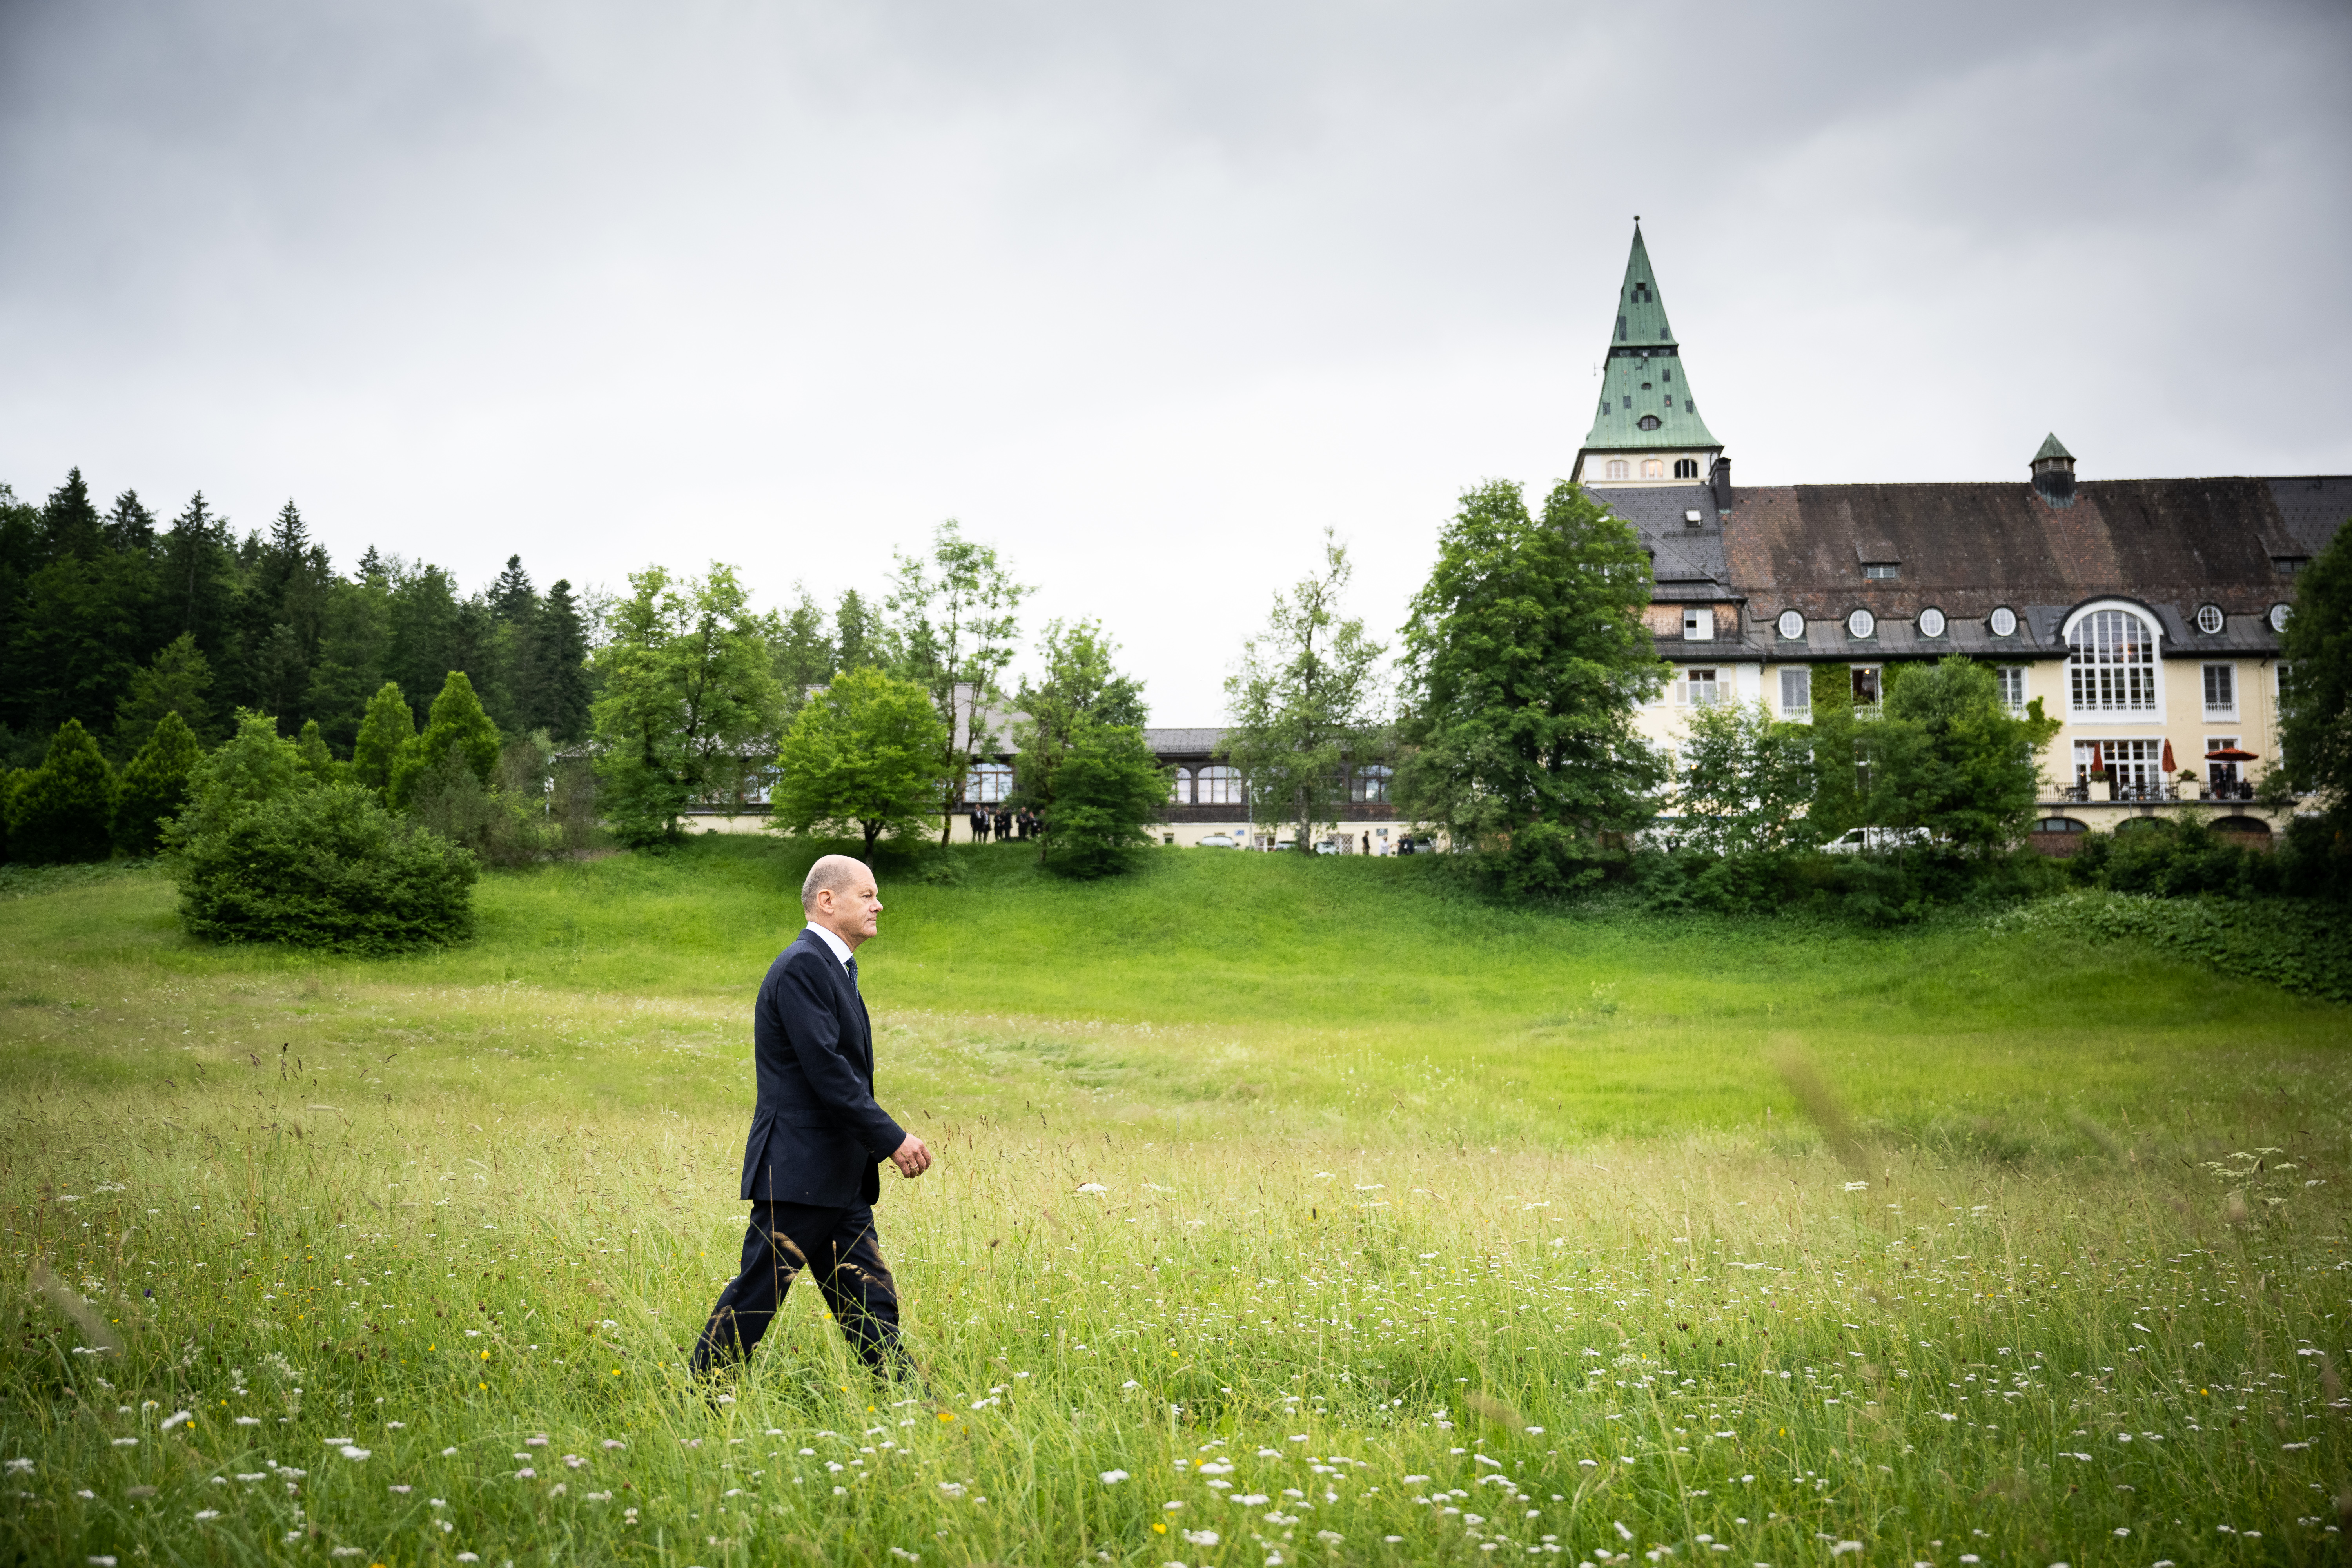 Federal Chancellor Olaf Scholz walks to the final press conference of the G7 summit. In the background we see Schloss Elmau.